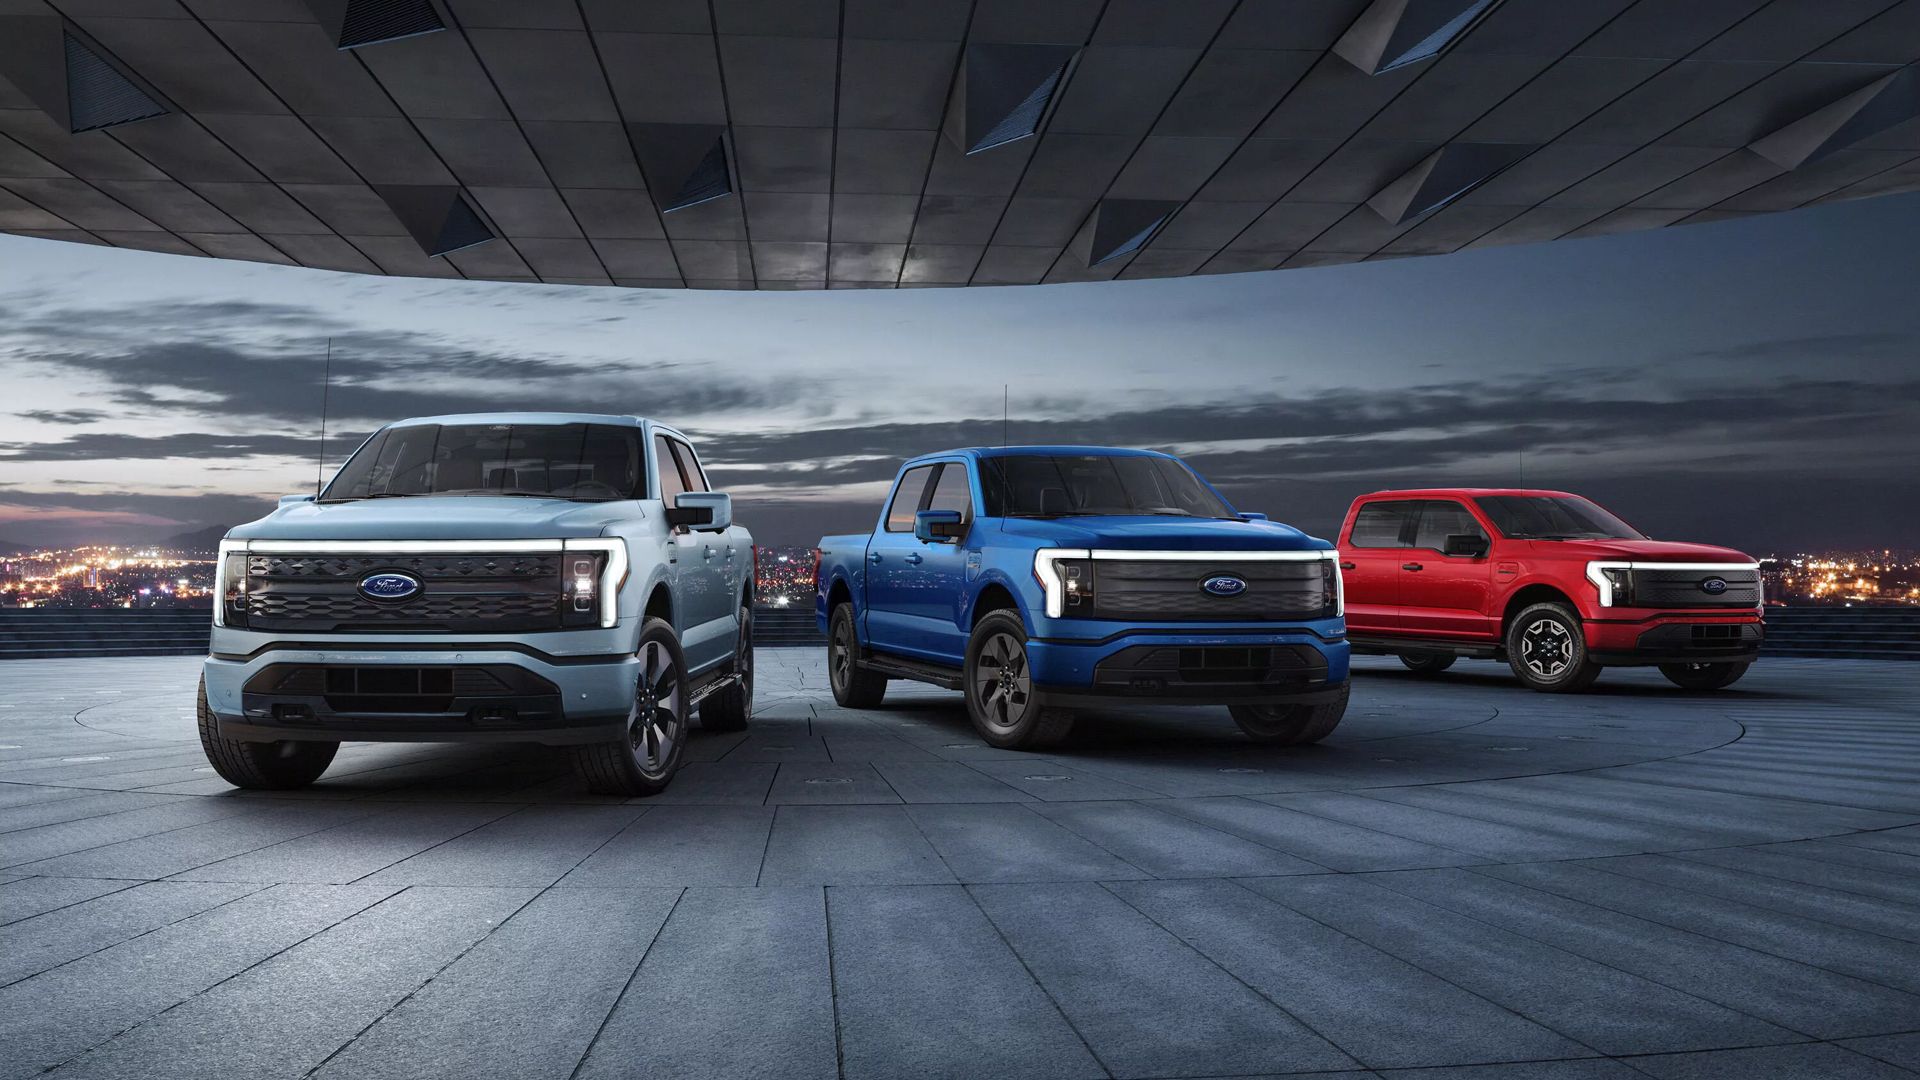 All trim levels of the Ford F-150 Lightning